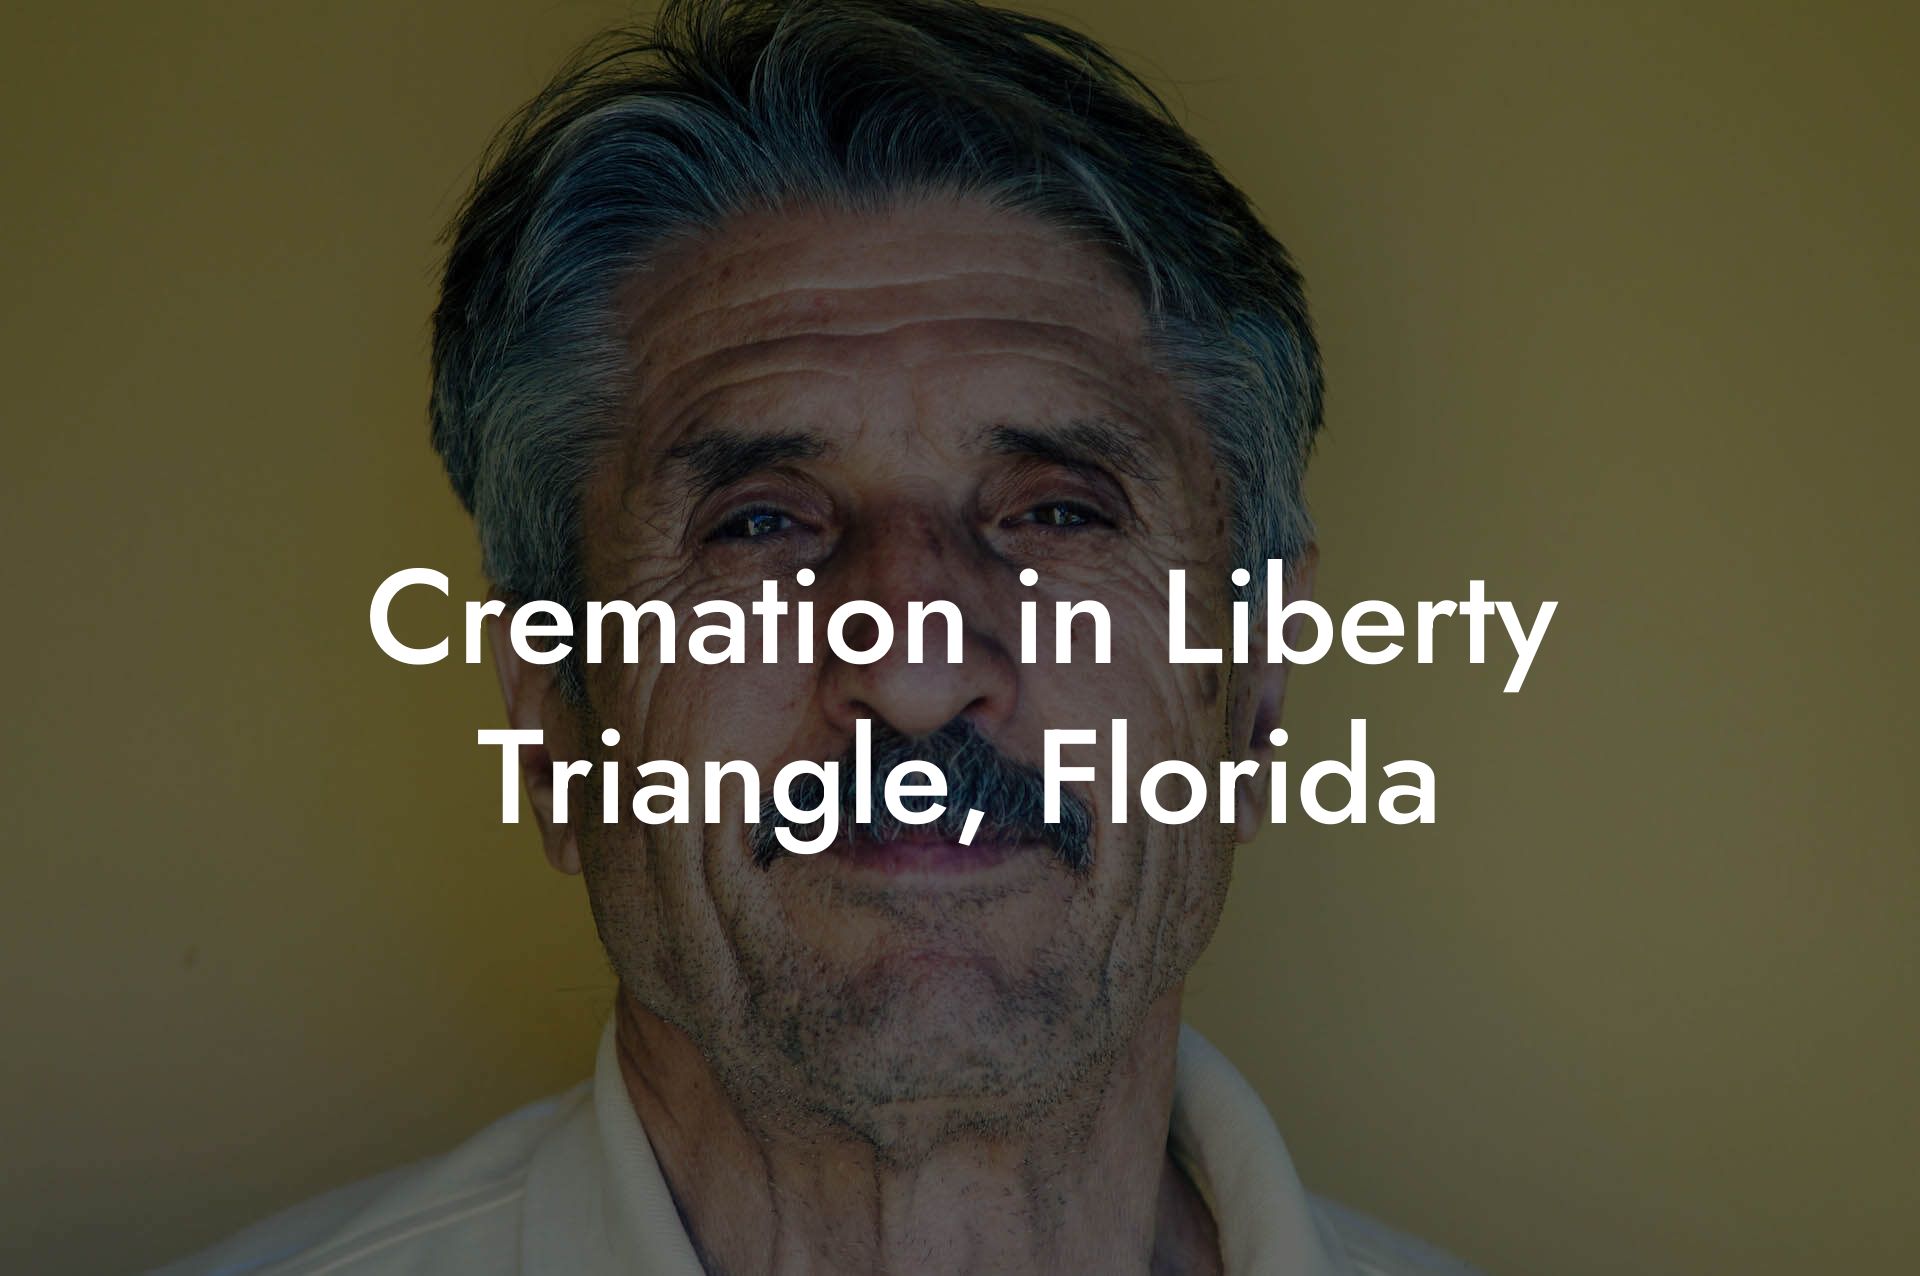 Cremation in Liberty Triangle, Florida